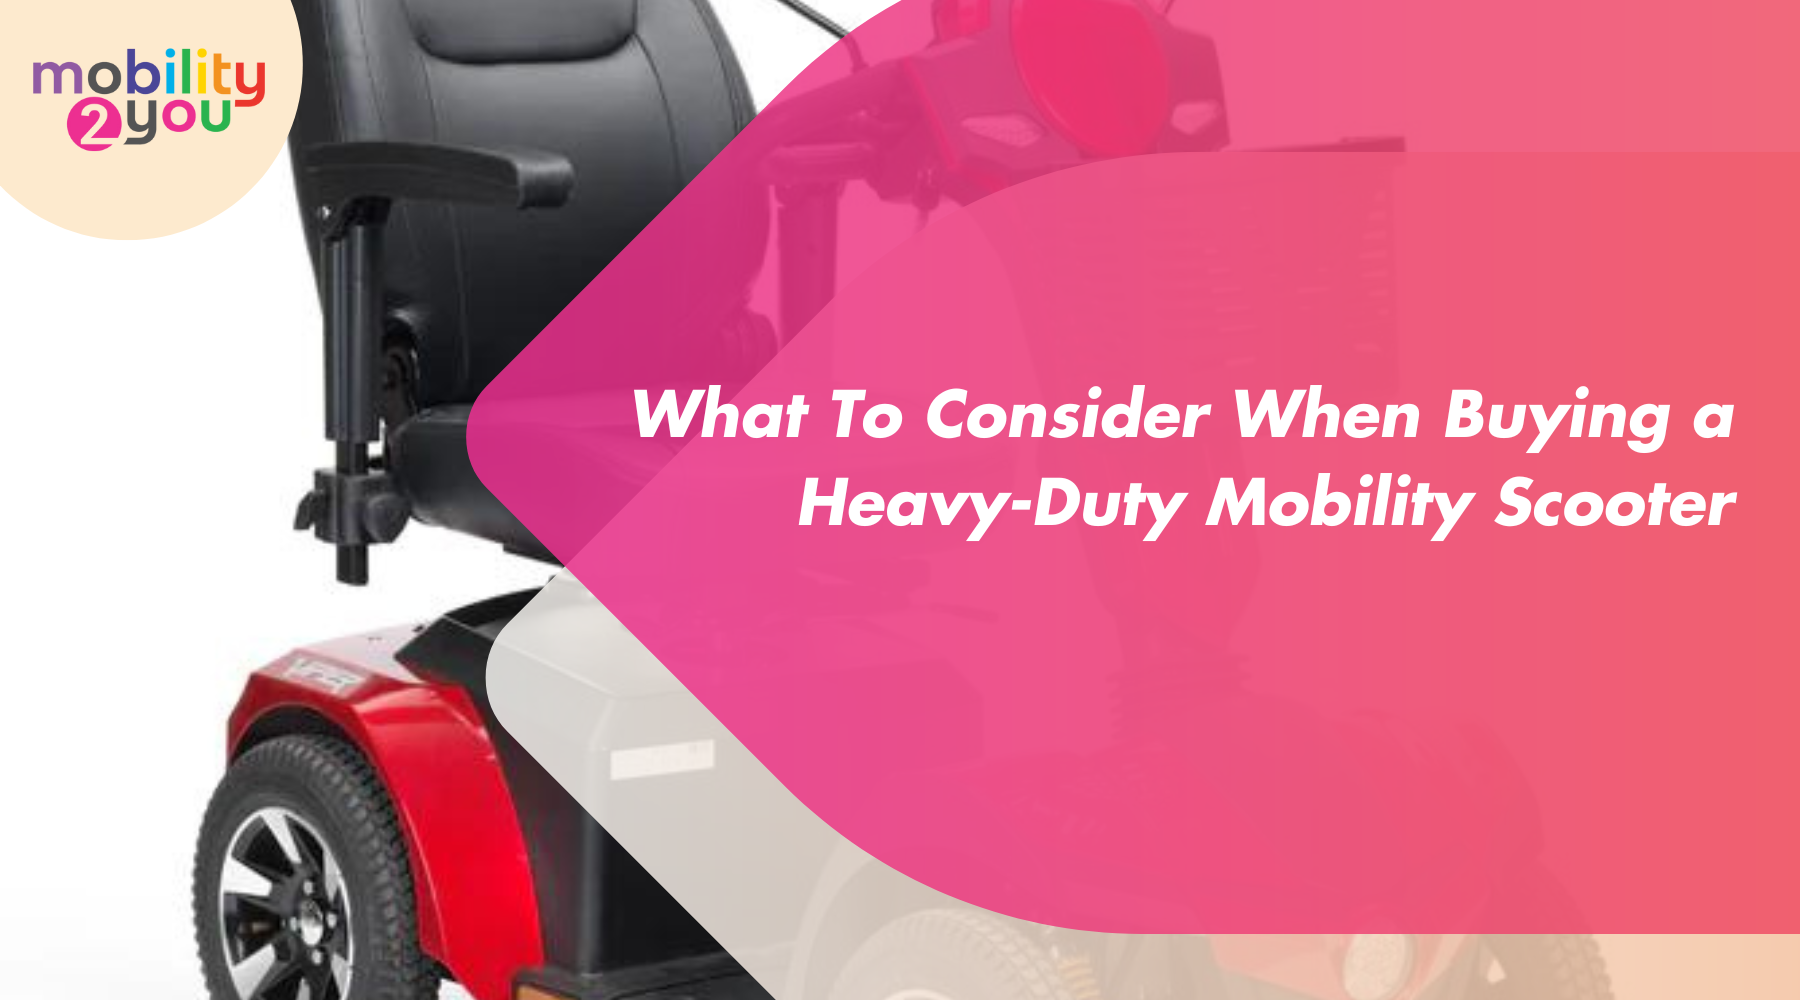 committed to providing premium-quality heavy-duty mobility scooters